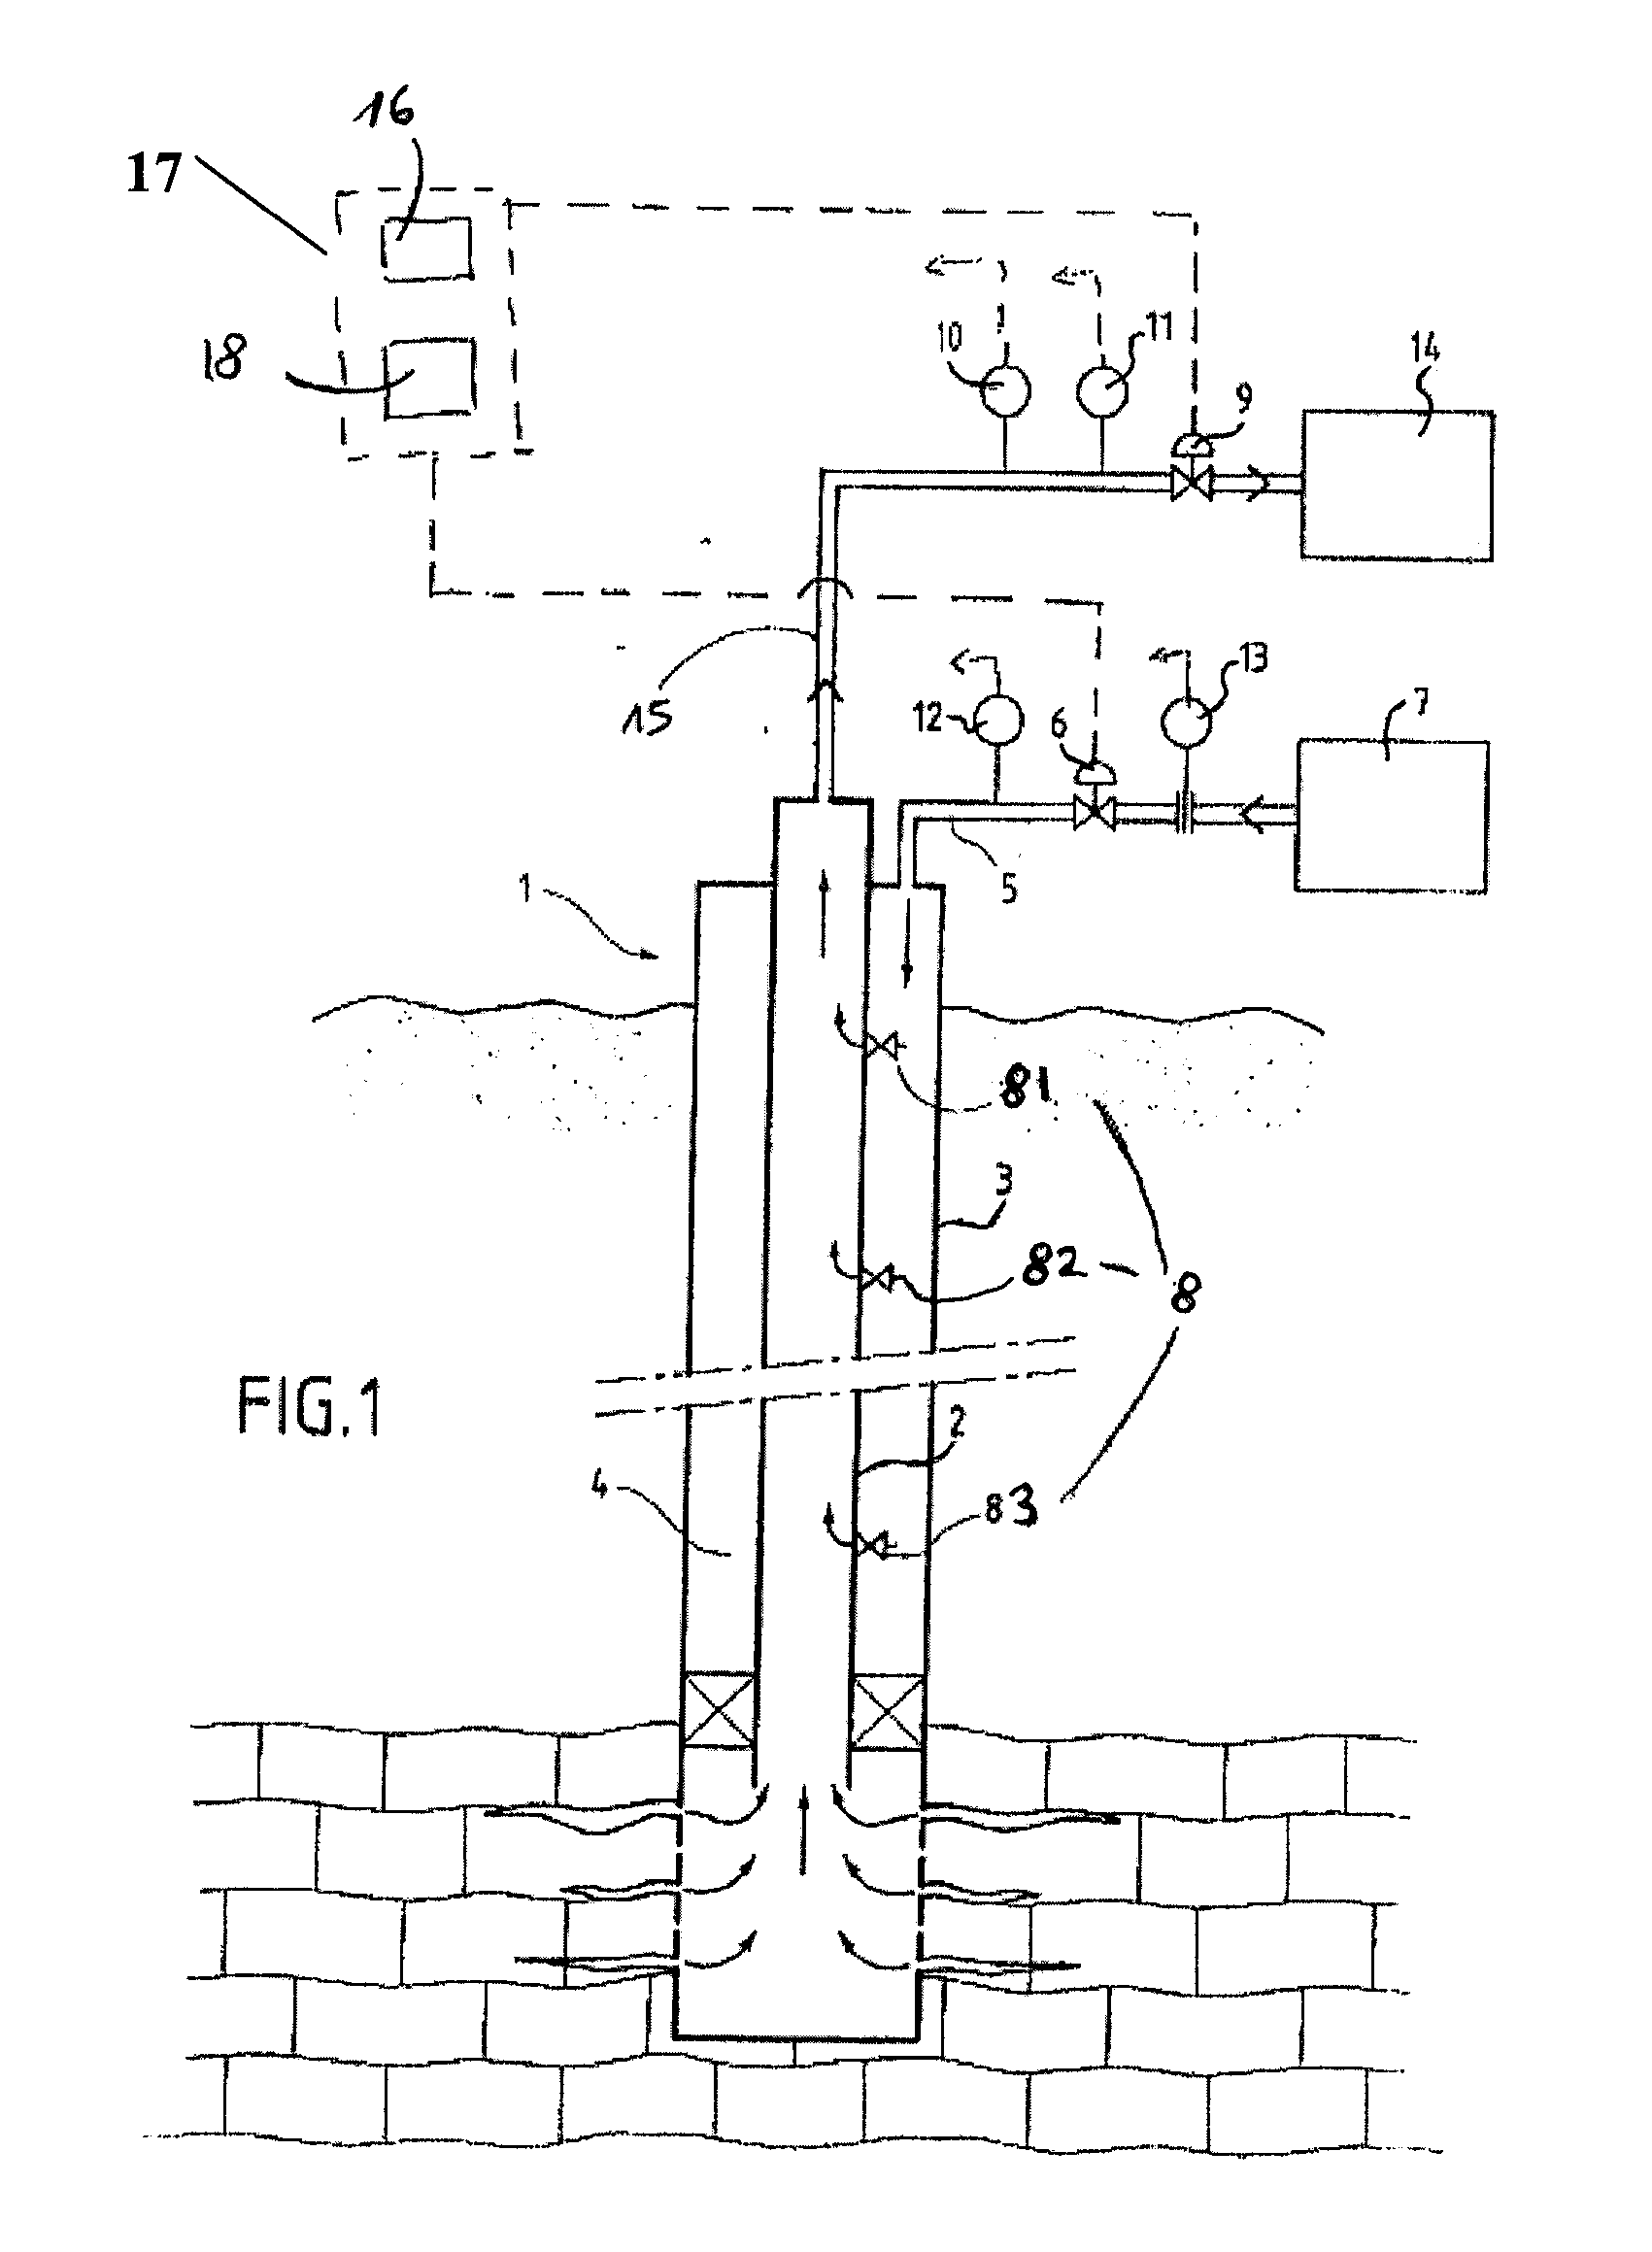 Method for Controlling a Hydrocarbons Production Installation